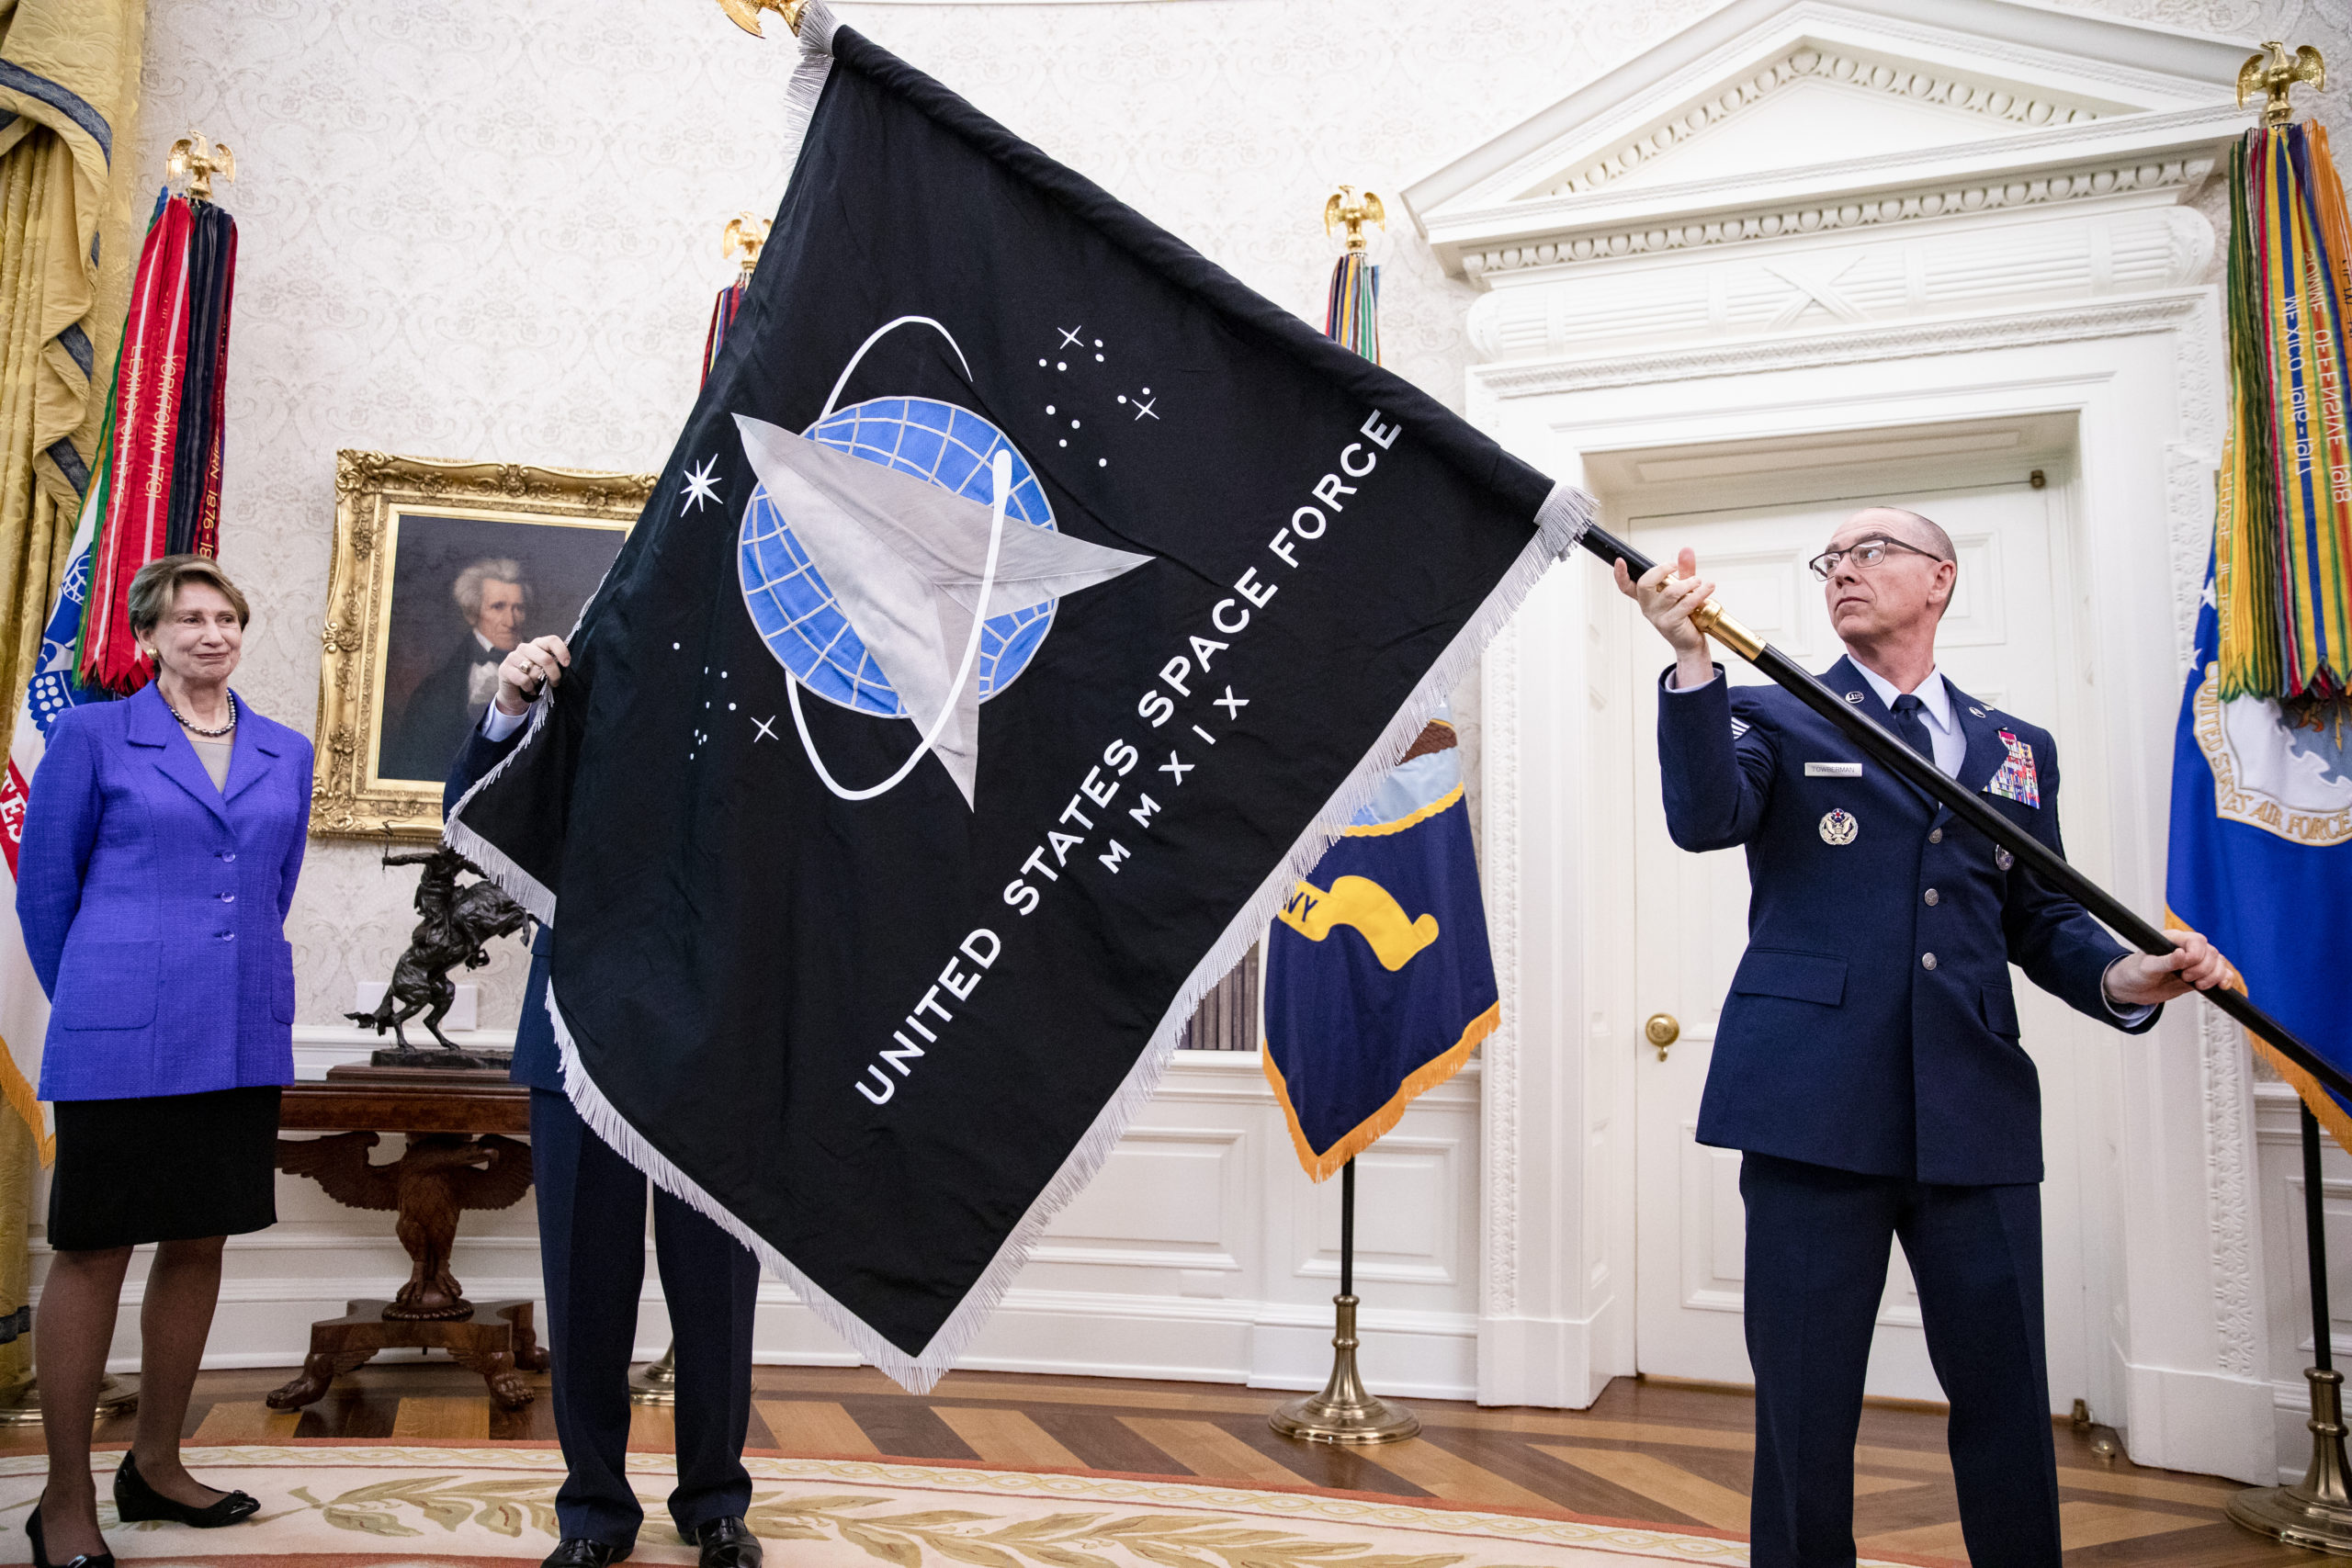 WASHINGTON, DC - MAY 15: Chief Master Sgt. Roger Towberman (R), Space Force and Command Senior Enlisted Leader and CMSgt Roger Towberman (L), with Secretary of the Air Force Barbara Barrett present US President Donald Trump with the official flag of the United States Space Force in the Oval Office of the White House in Washington, DC on May 15, 2020. 